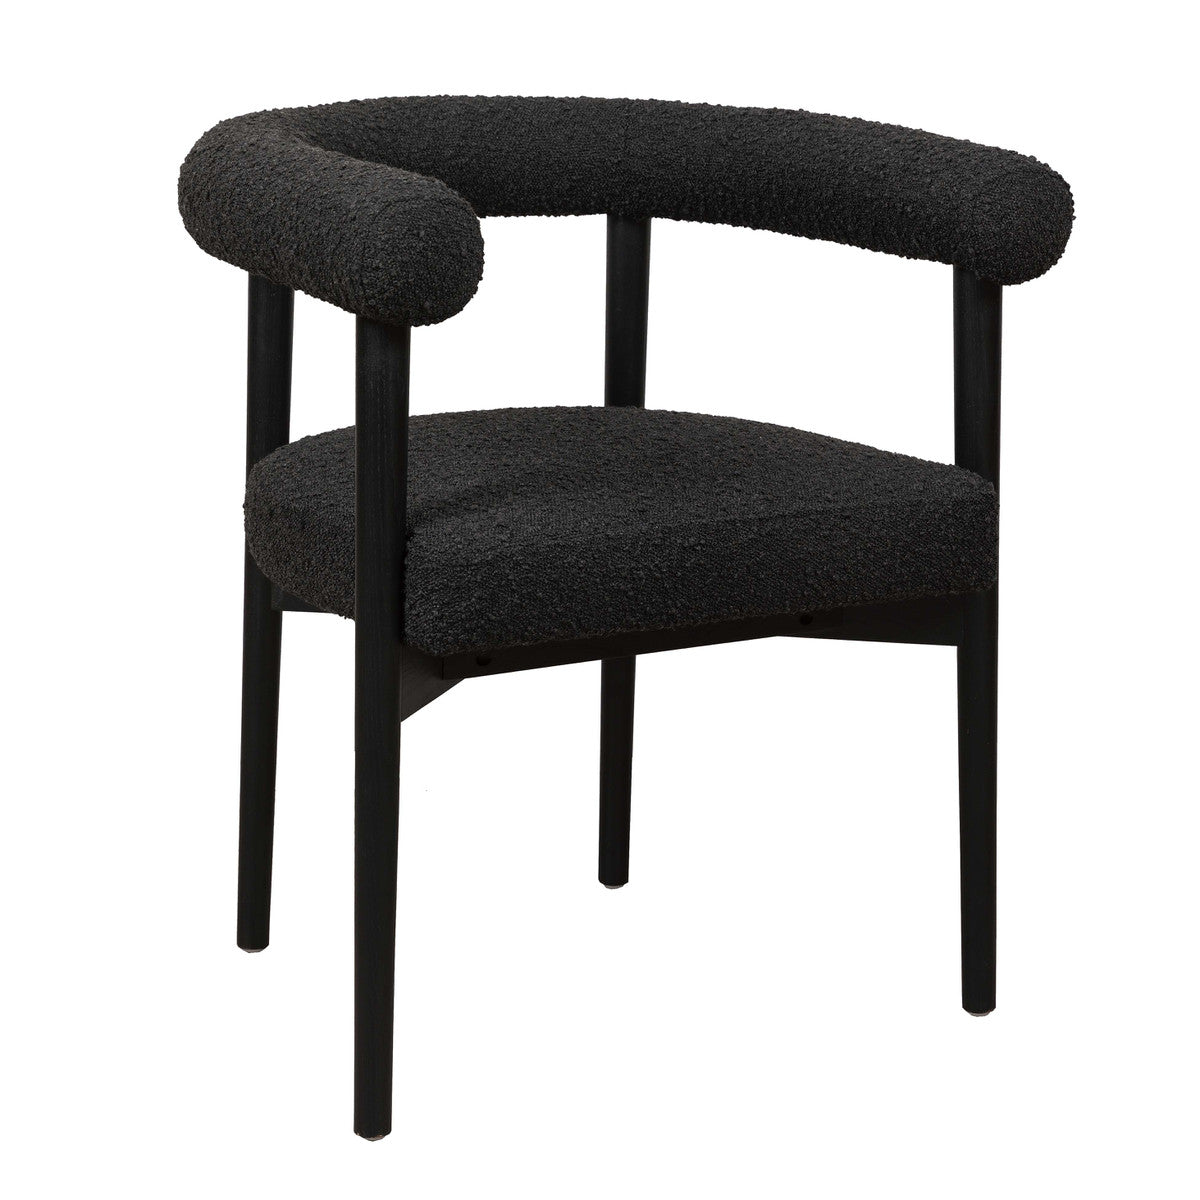 Spara Boucle Dining Chair Black Boucle/Black FrameDining Chair TOV Furniture  Black Boucle/Black Frame   Four Hands, Mid Century Modern Furniture, Old Bones Furniture Company, Old Bones Co, Modern Mid Century, Designer Furniture, https://www.oldbonesco.com/